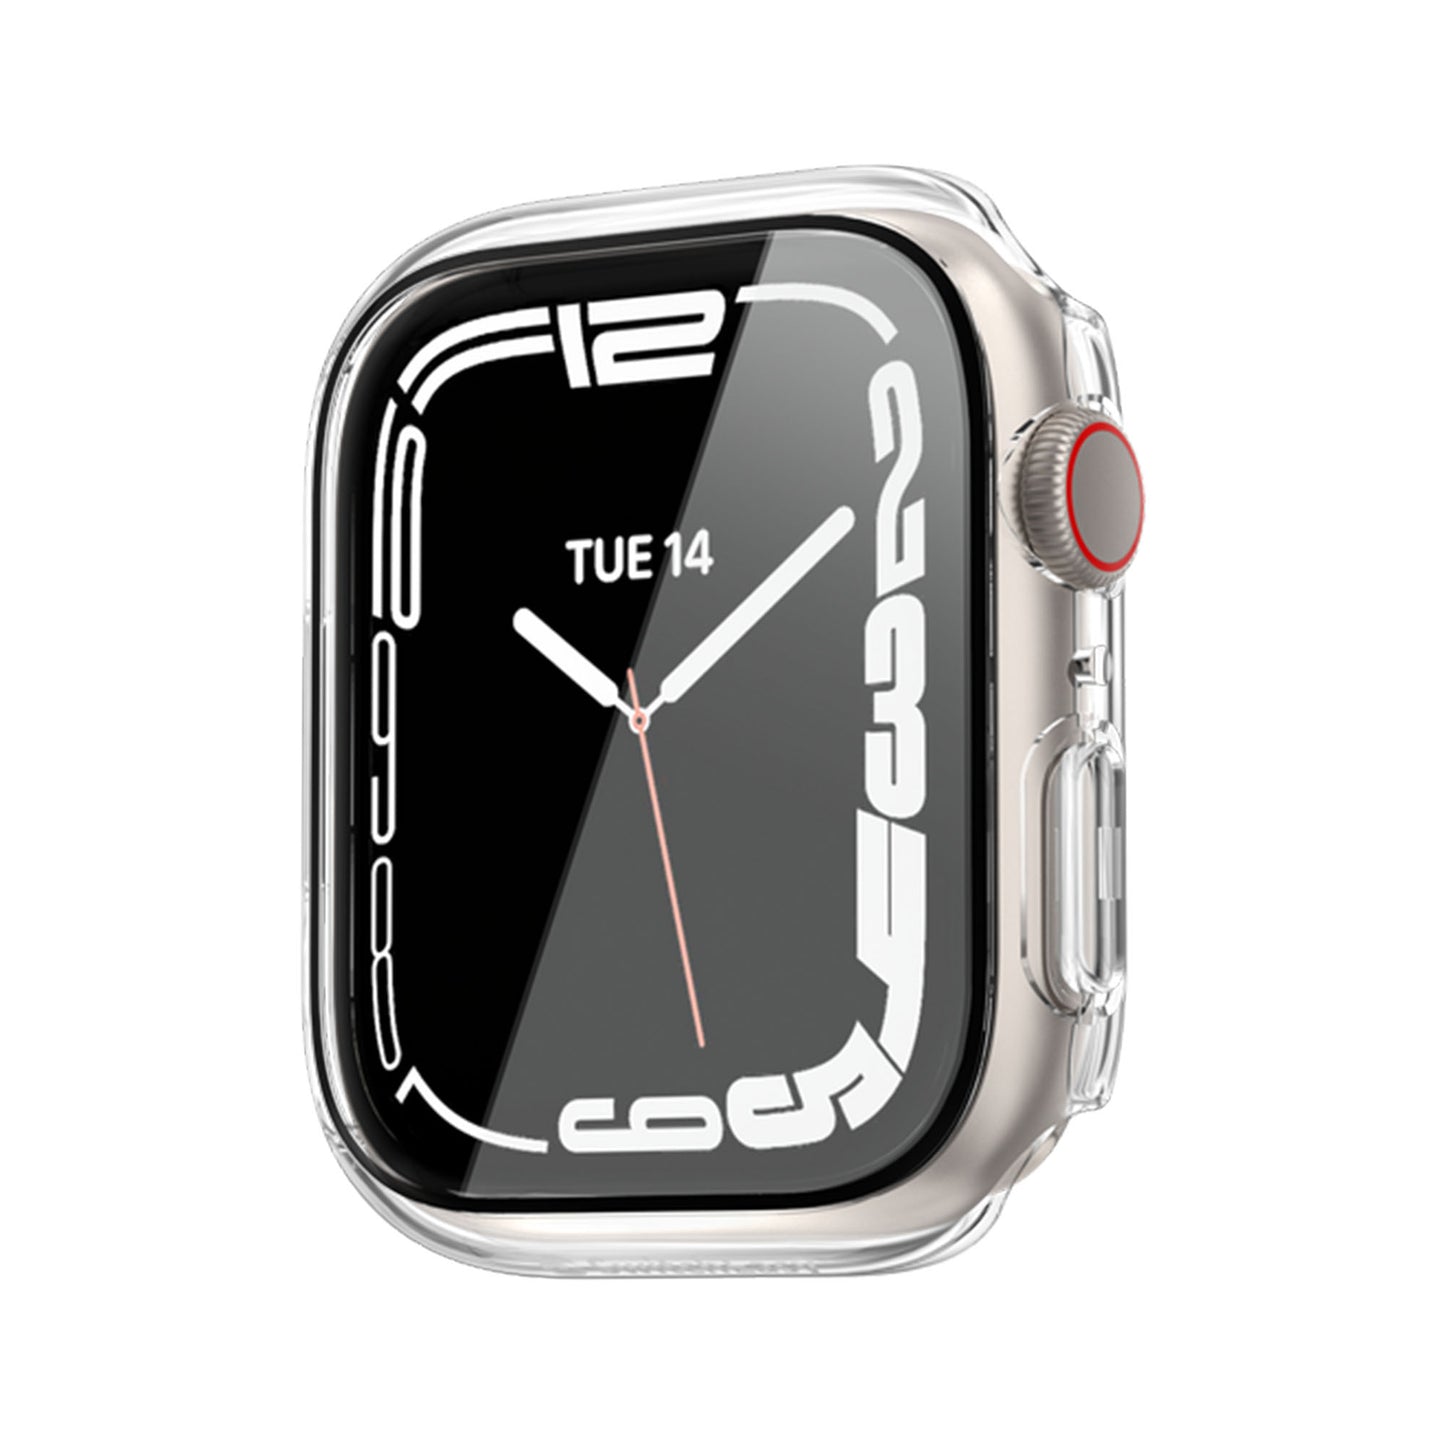 SwitchEasy Nude 2 in 1 Tempered Glass Hybrid Case for Apple Watch Series 7 ( 45mm ) with Build In Tempered Glass - Transparent (Barcode: 4895241108426 )